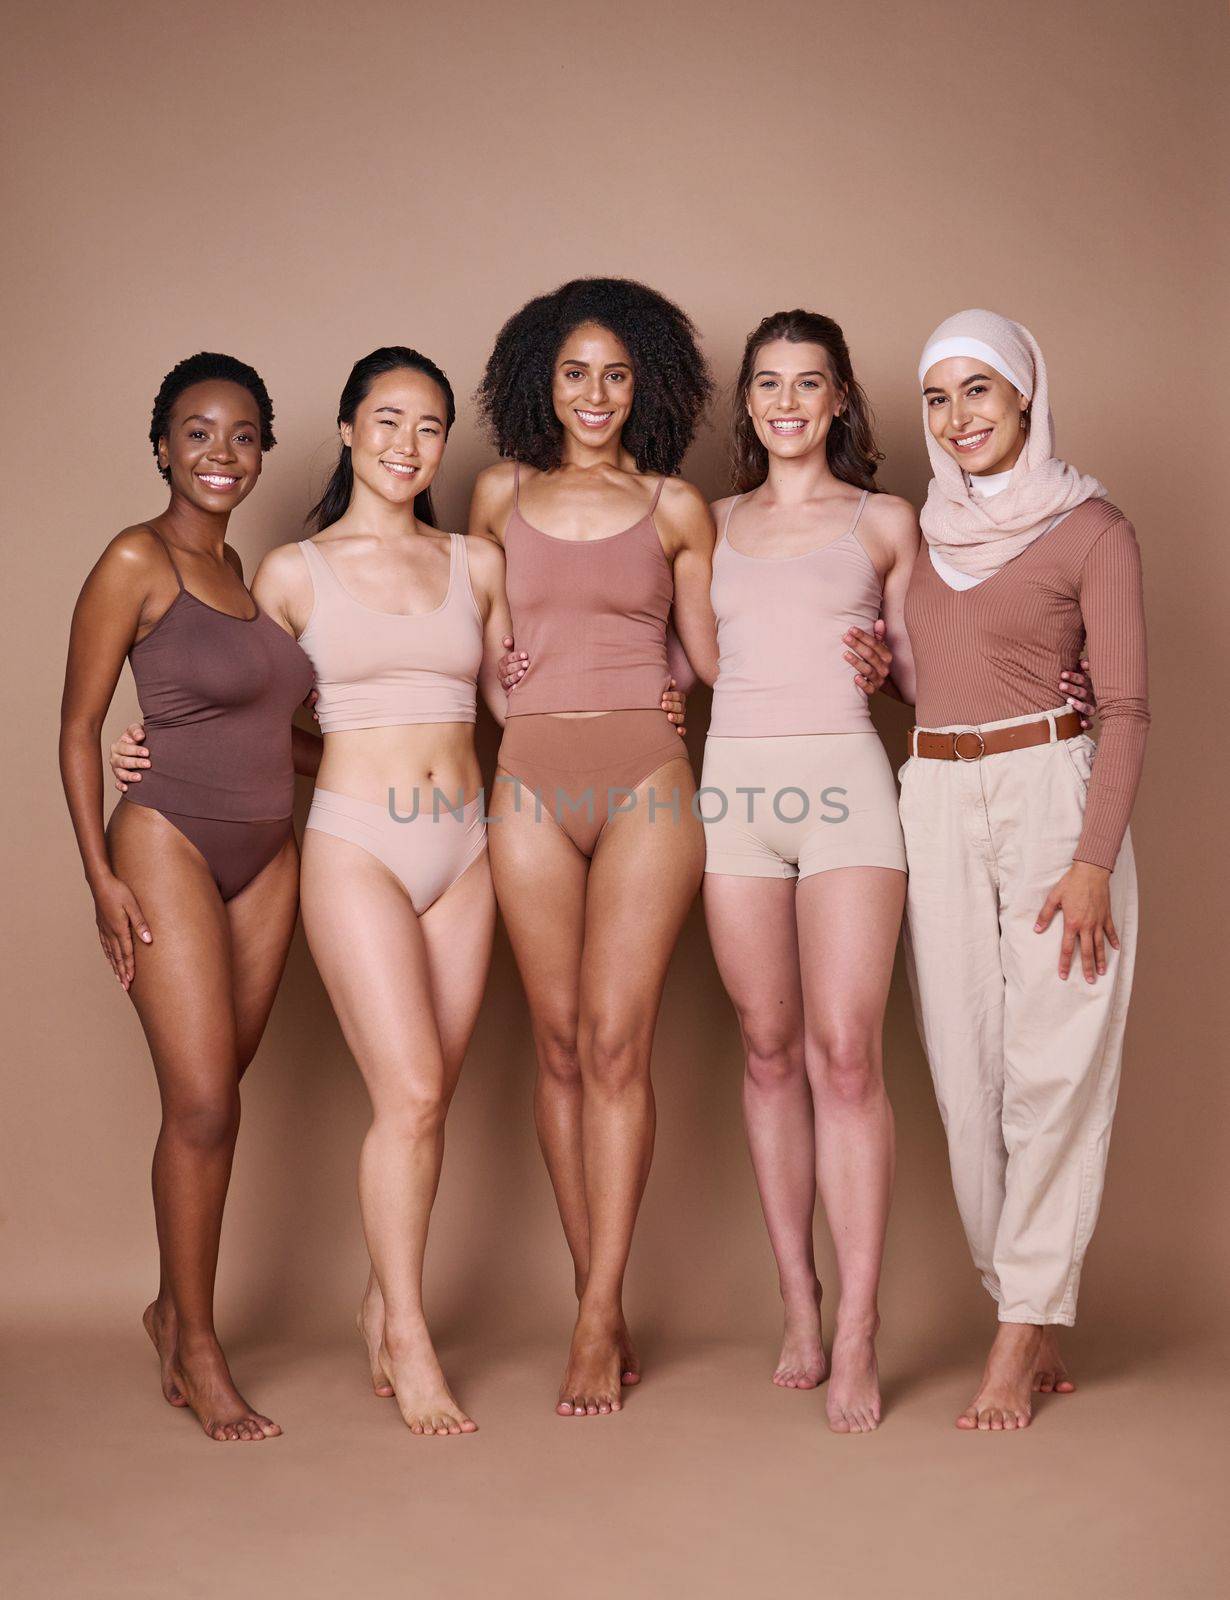 Beauty, diversity and body positivity with a woman friends together in studio on a brown background for inclusion. Portrait, model and underwear with a female friend group standing proud in unity.